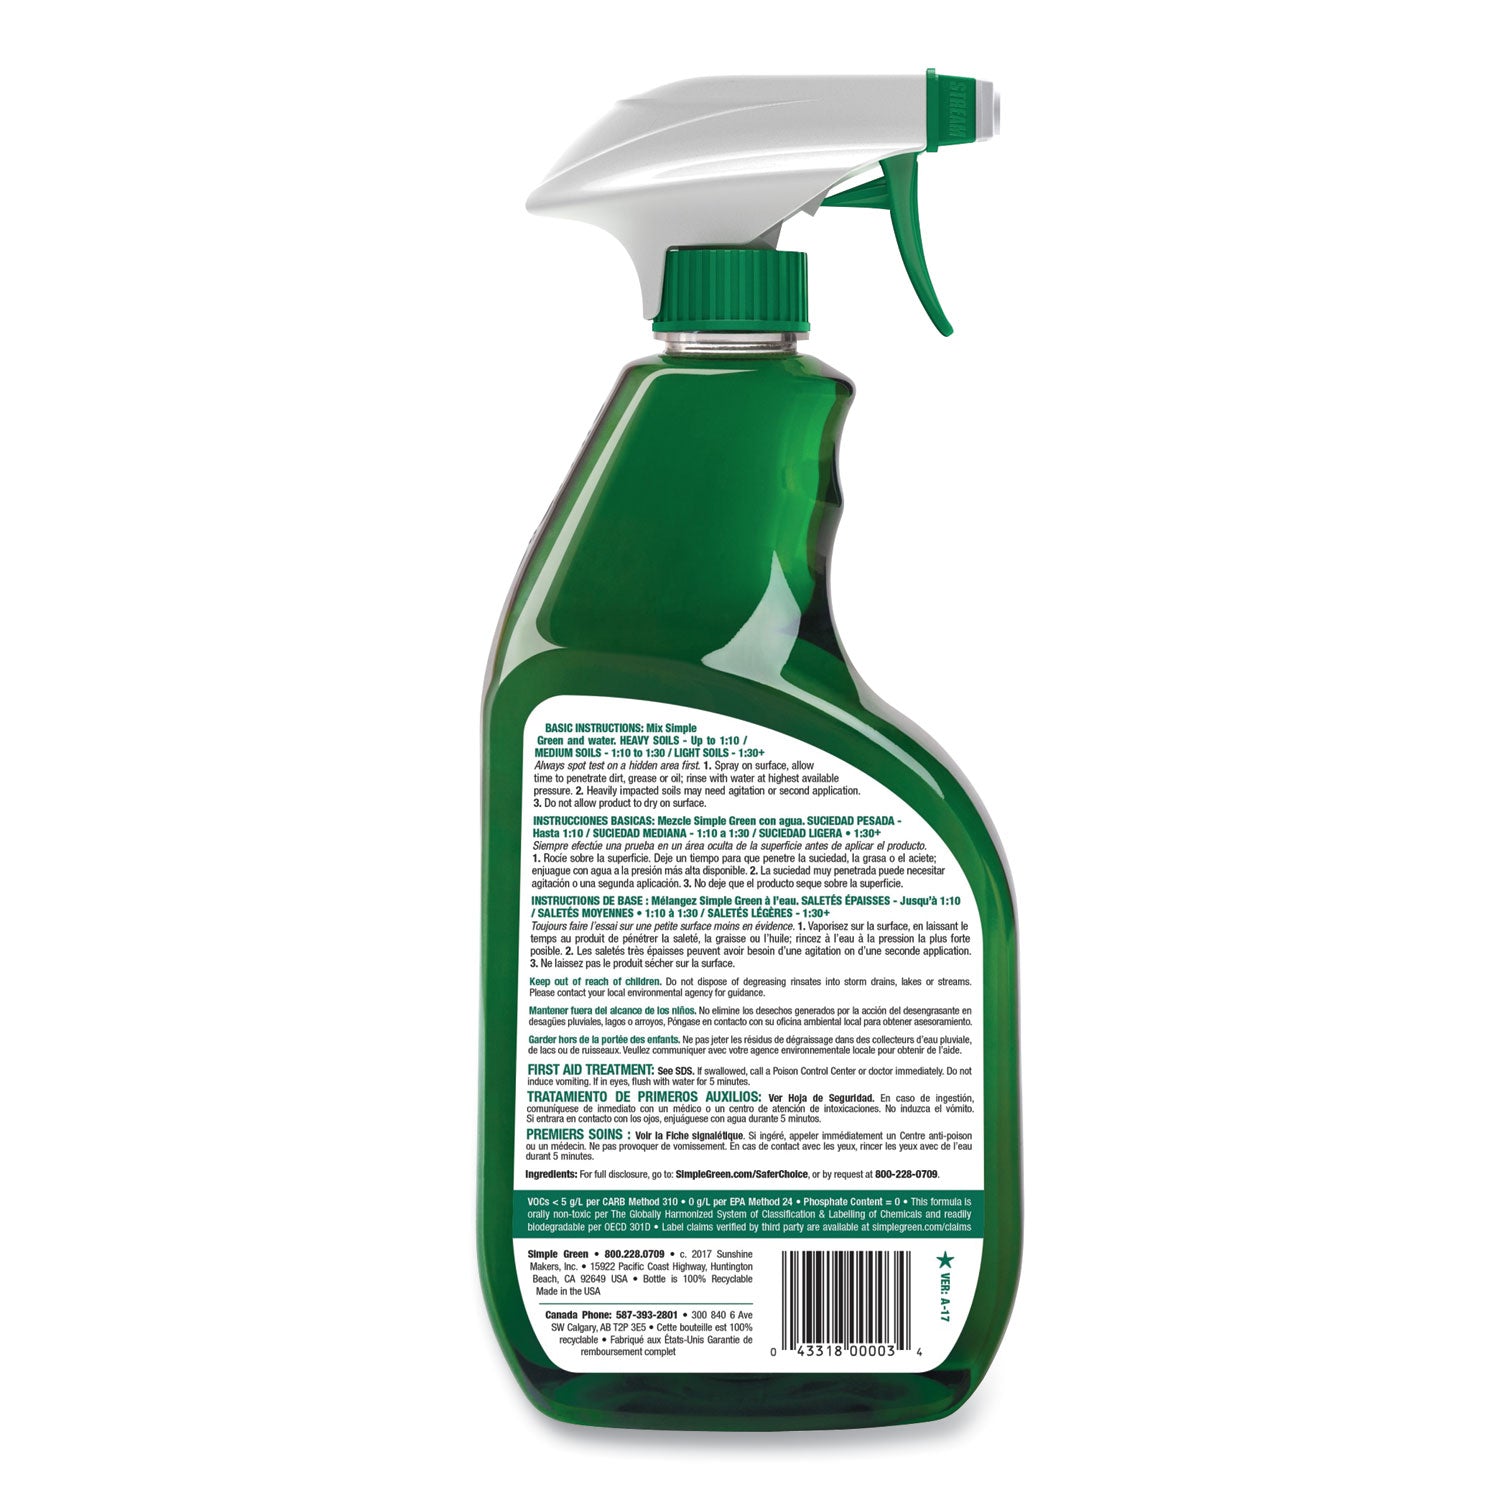 Industrial Cleaner and Degreaser, Concentrated, 24 oz Spray Bottle - 